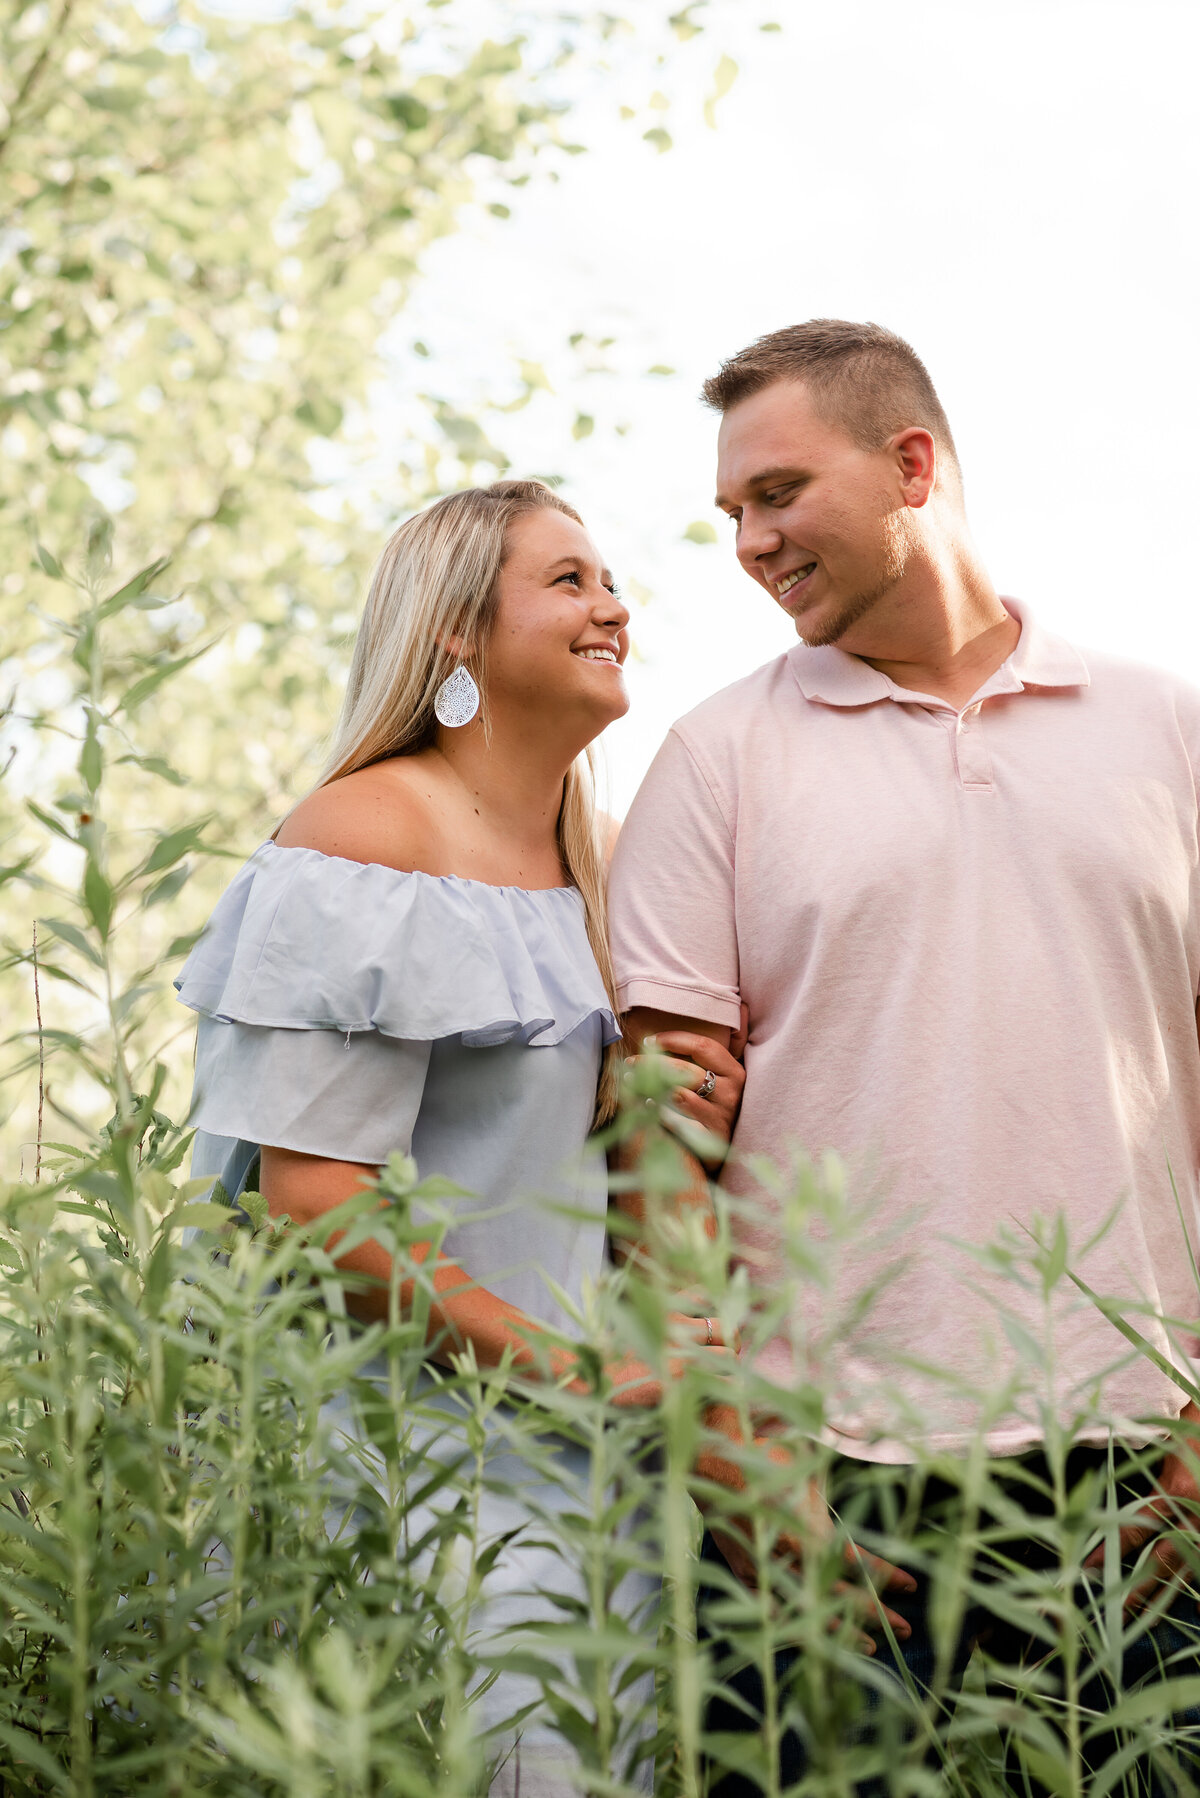 Photos of couple in tall grass taken by Michelle Lynn Photography located near Louisville, Kentucky